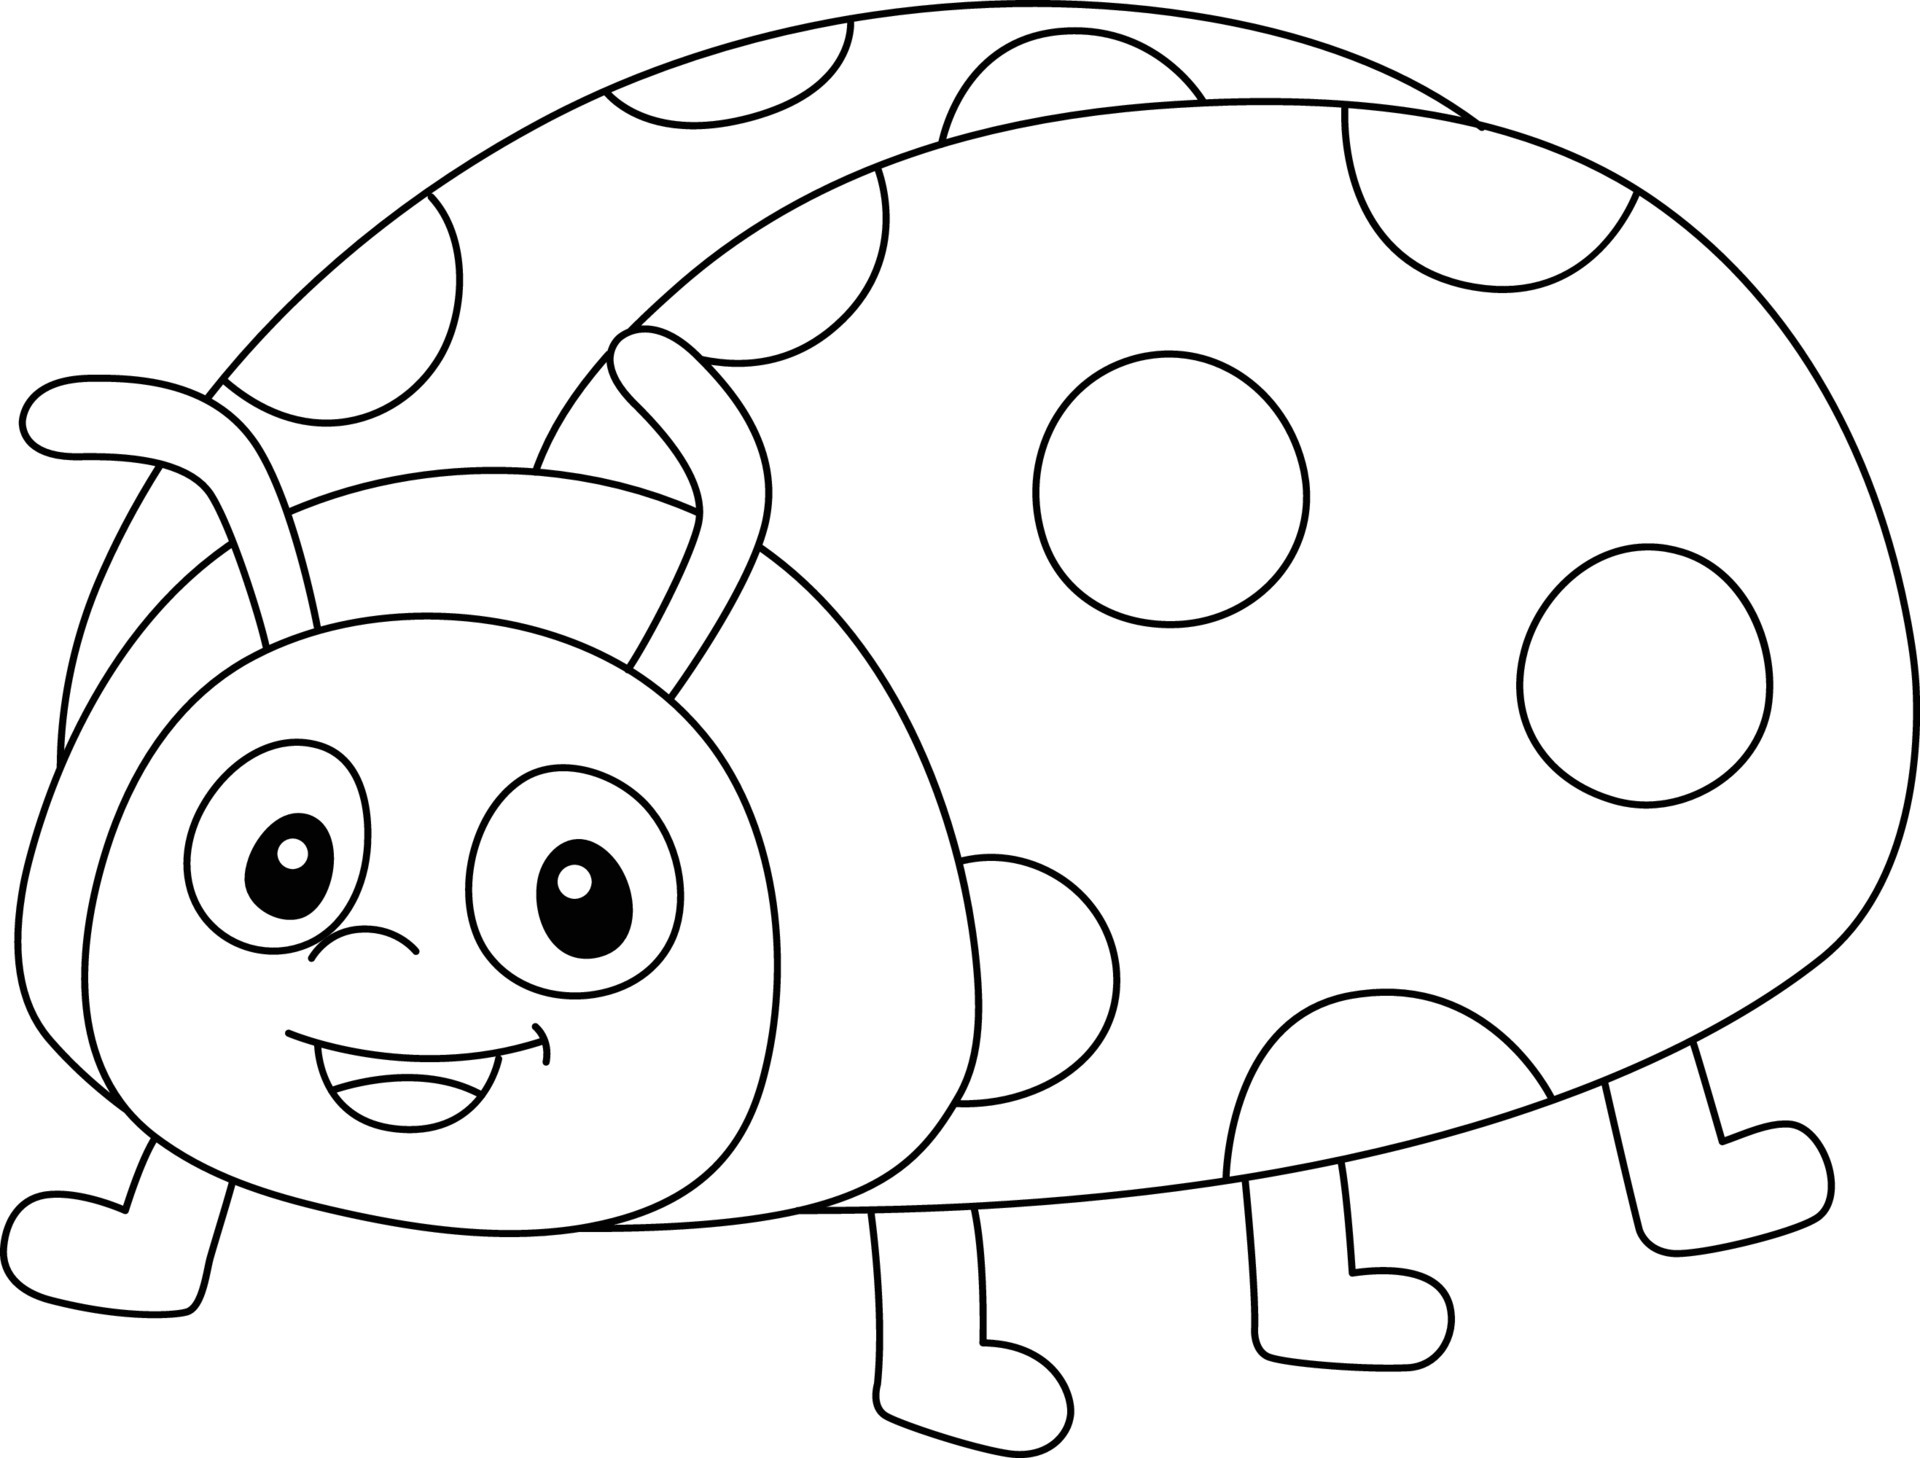 Ladybug Coloring Vector Art, Icons, and Graphics for Free Download